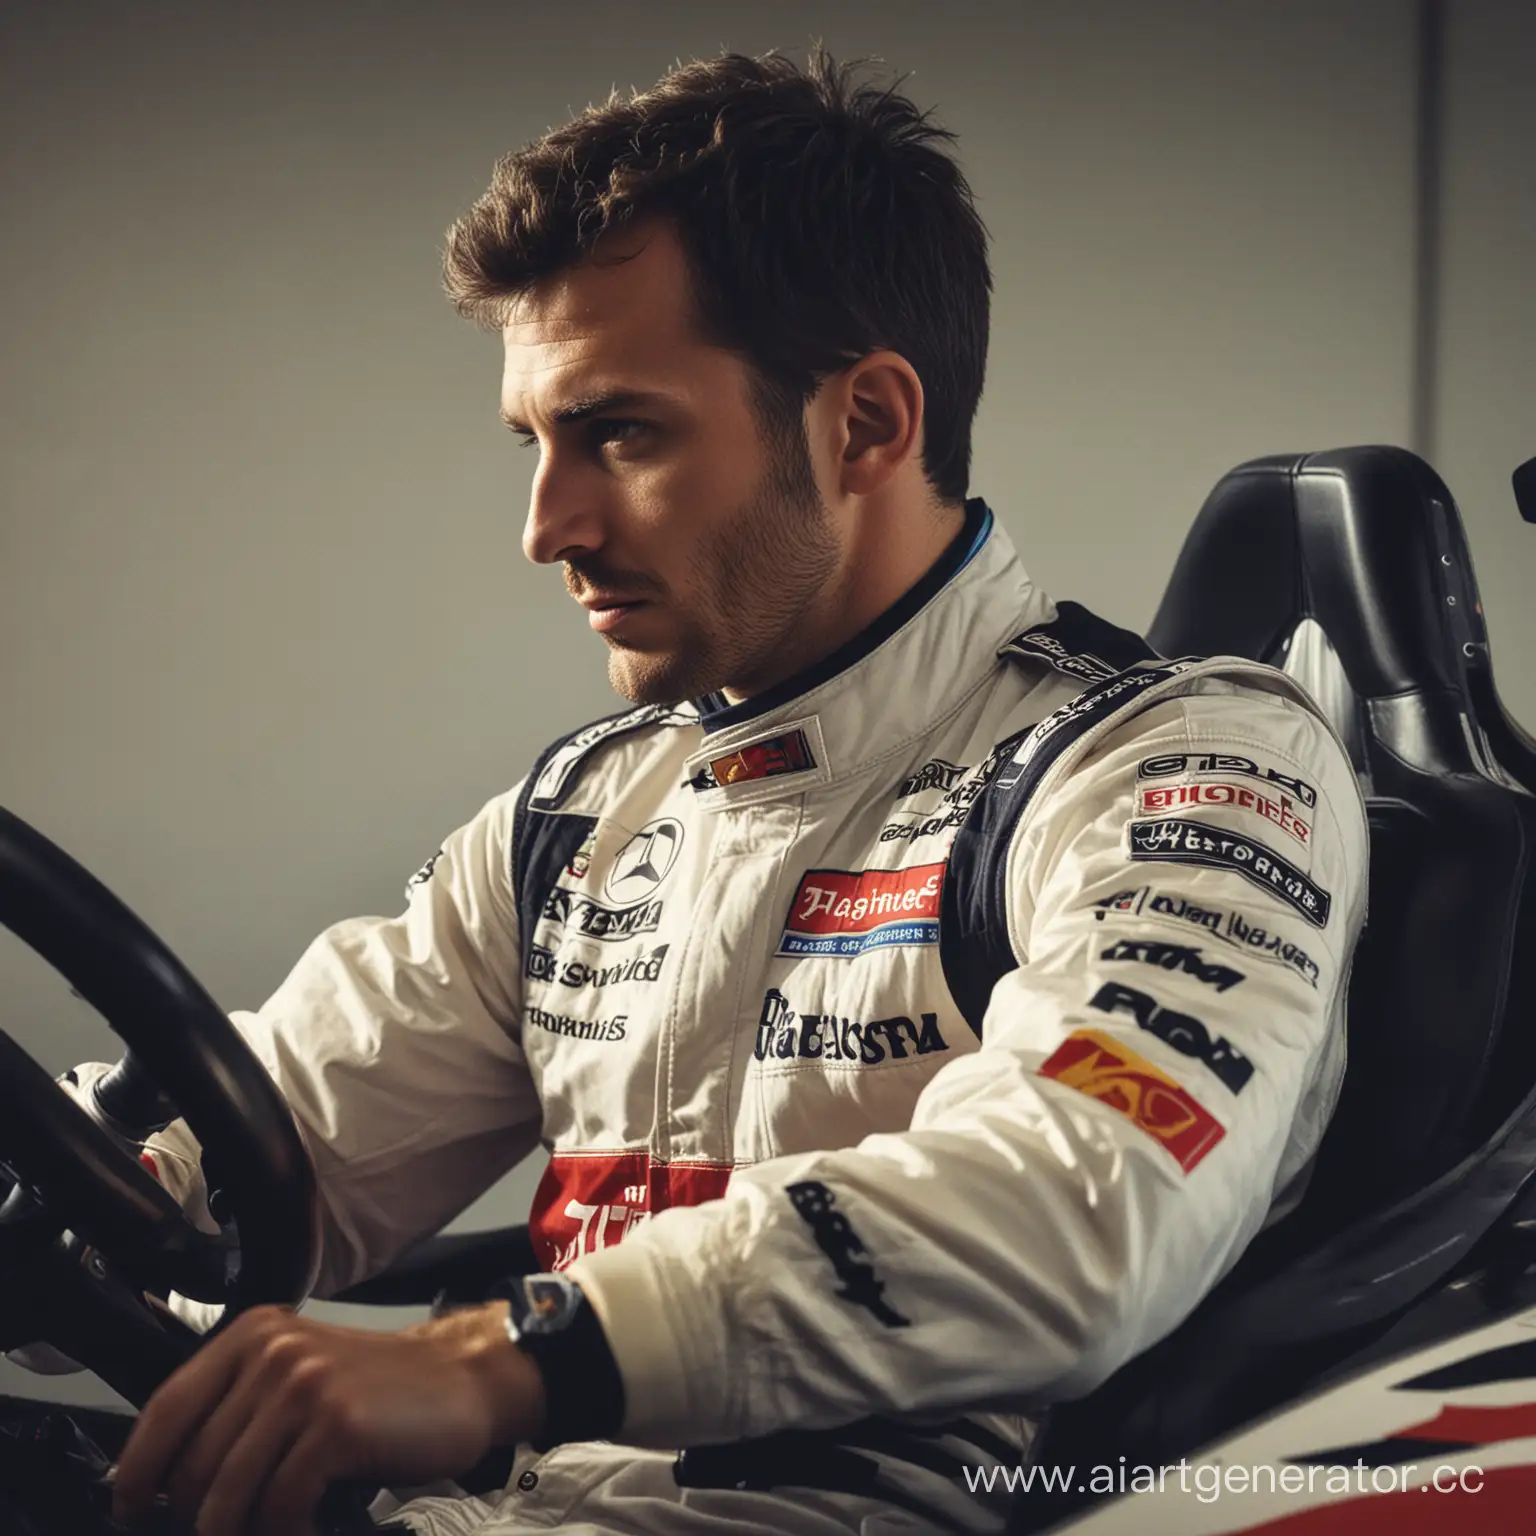 A man dressed in a racer's uniform from Formula 1 sits at the wheel in profile